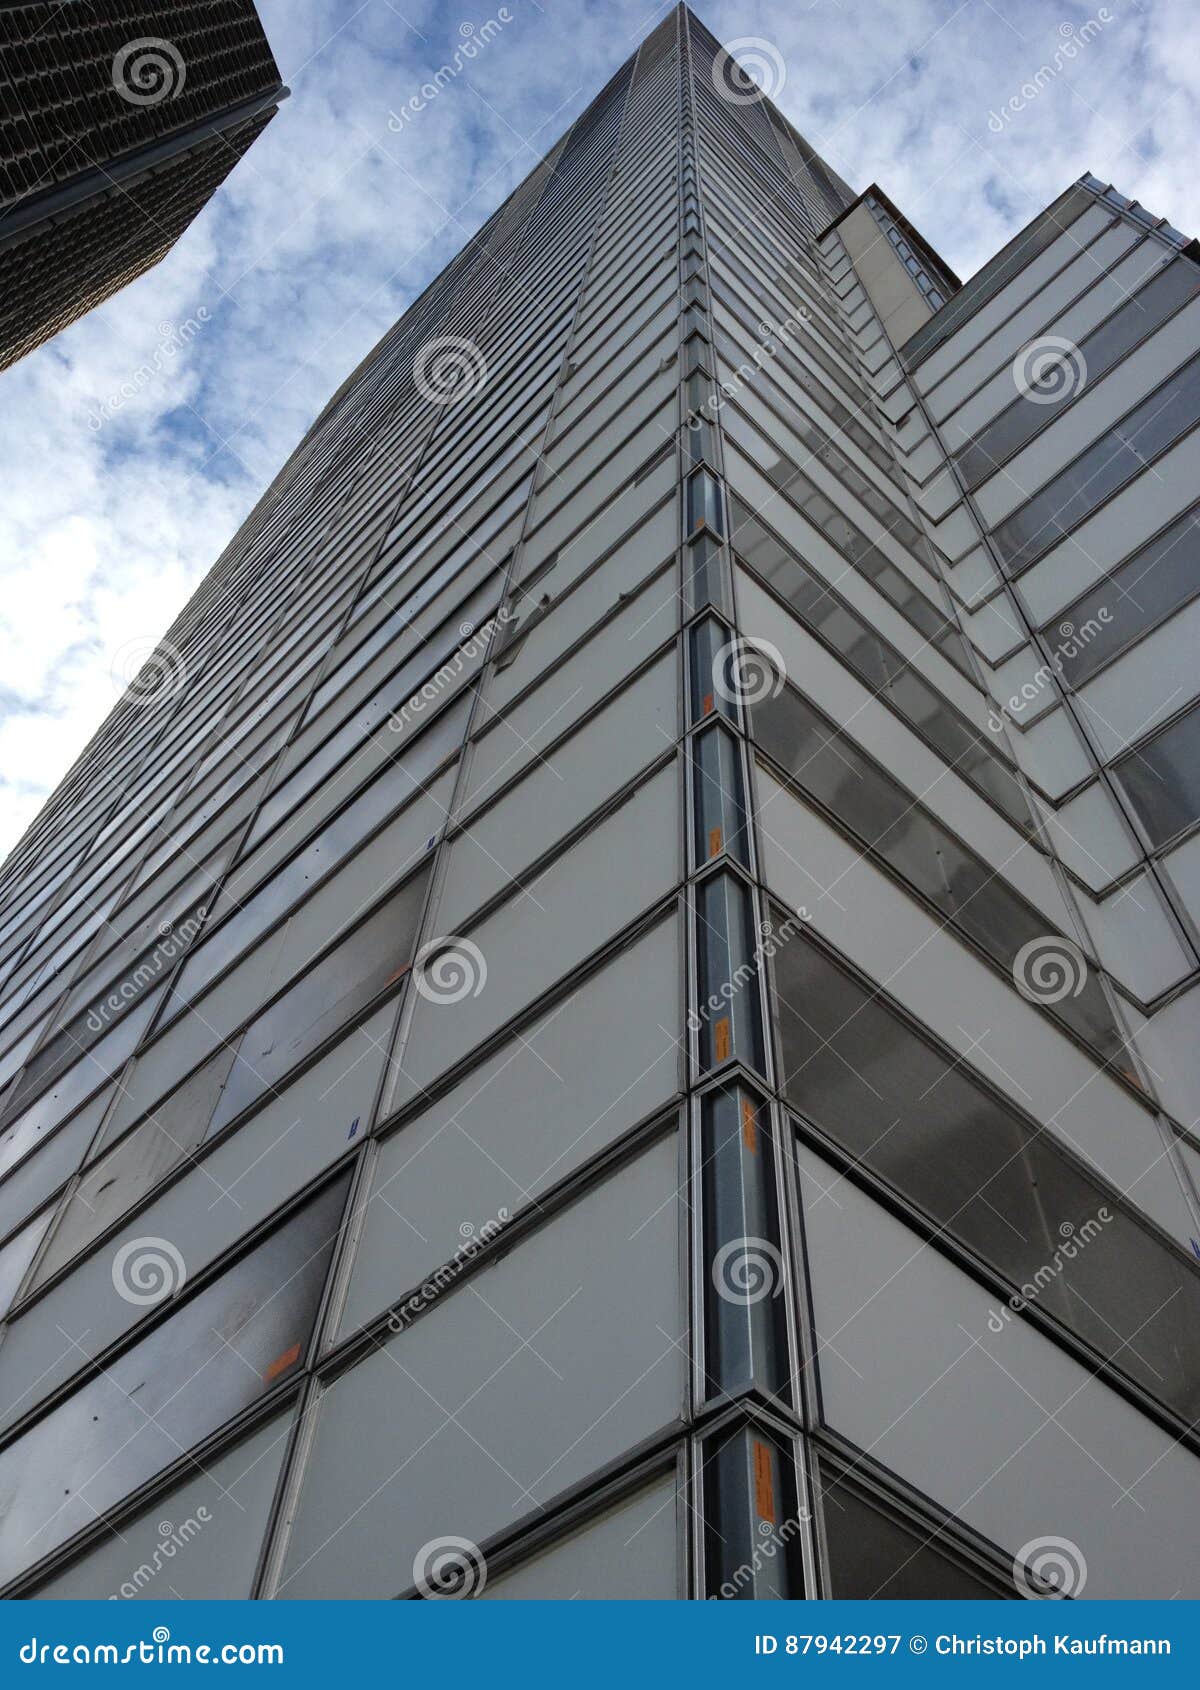 Low angle view of a modern business building with grey facade made of glass against cloudy sky